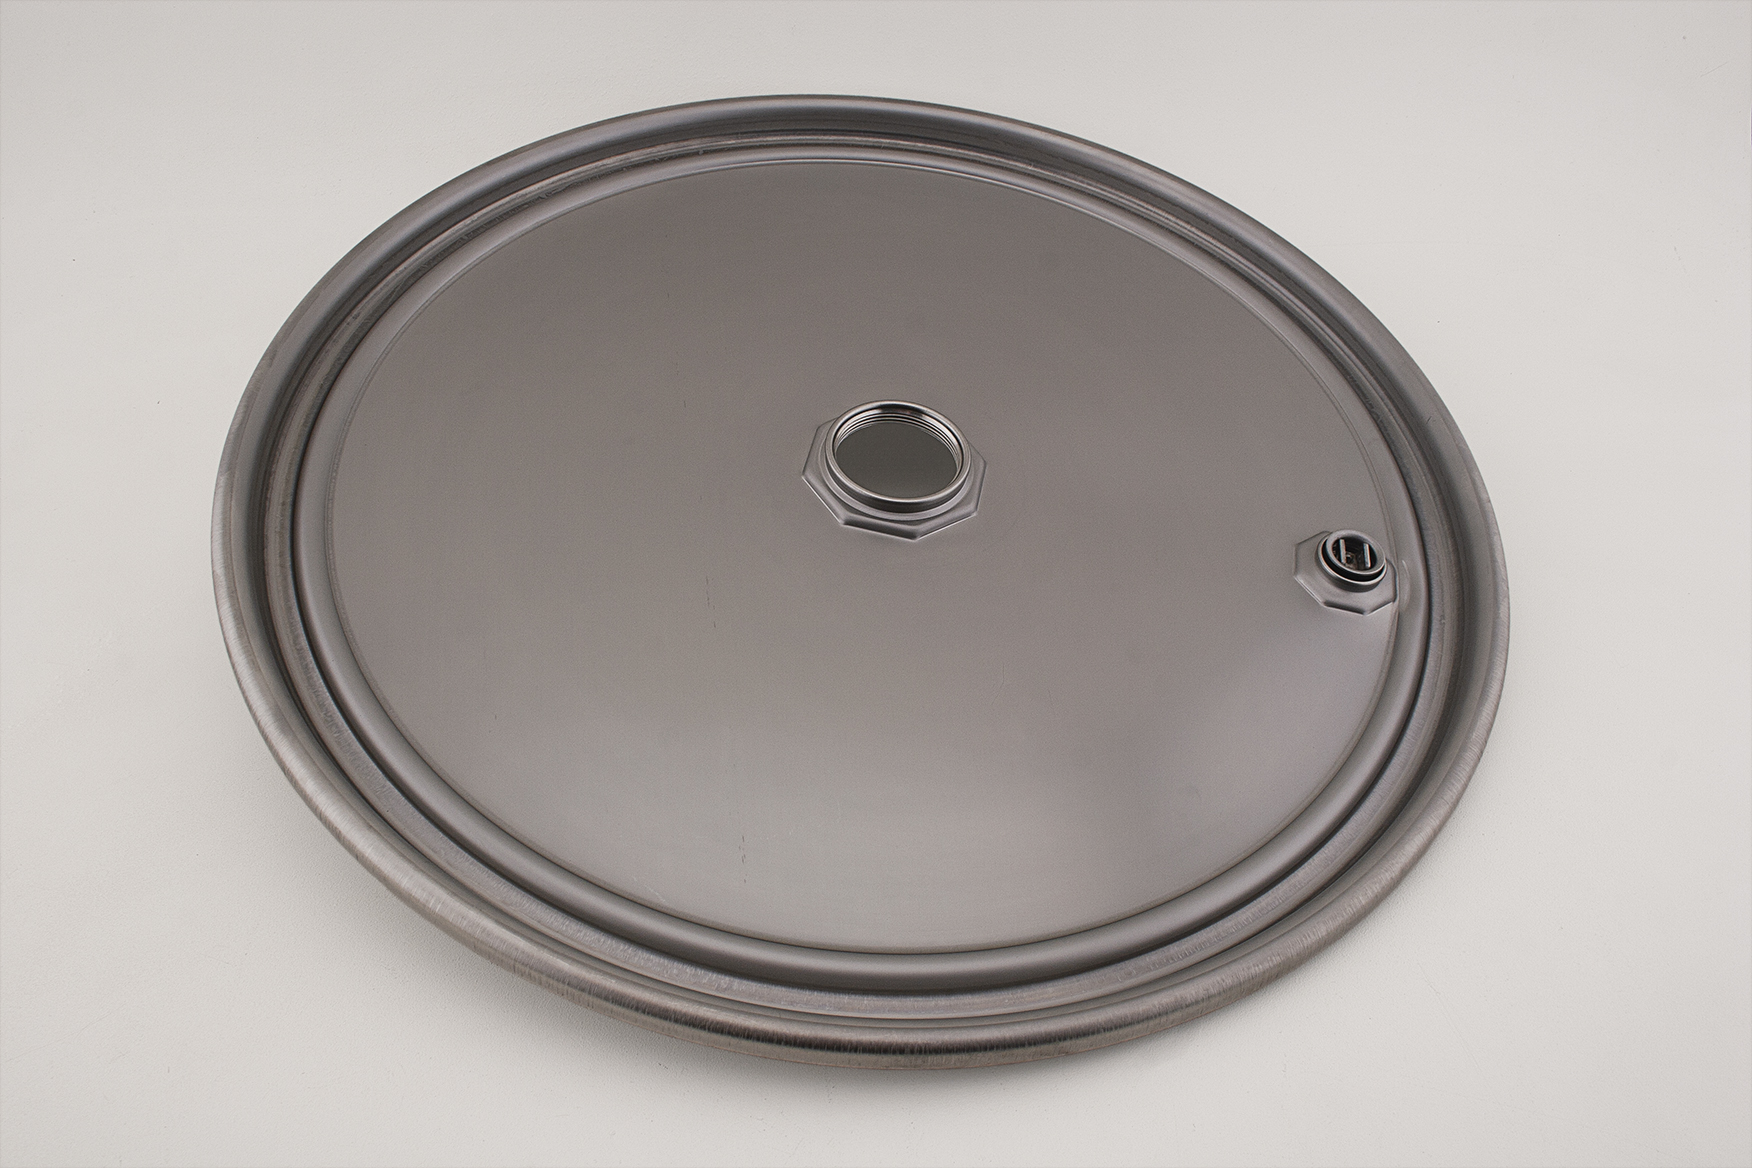 Details about   Drum Cover Lid 23in Diameter  Steel 52 Gallon Drums Can Covers Top Rim Lid 